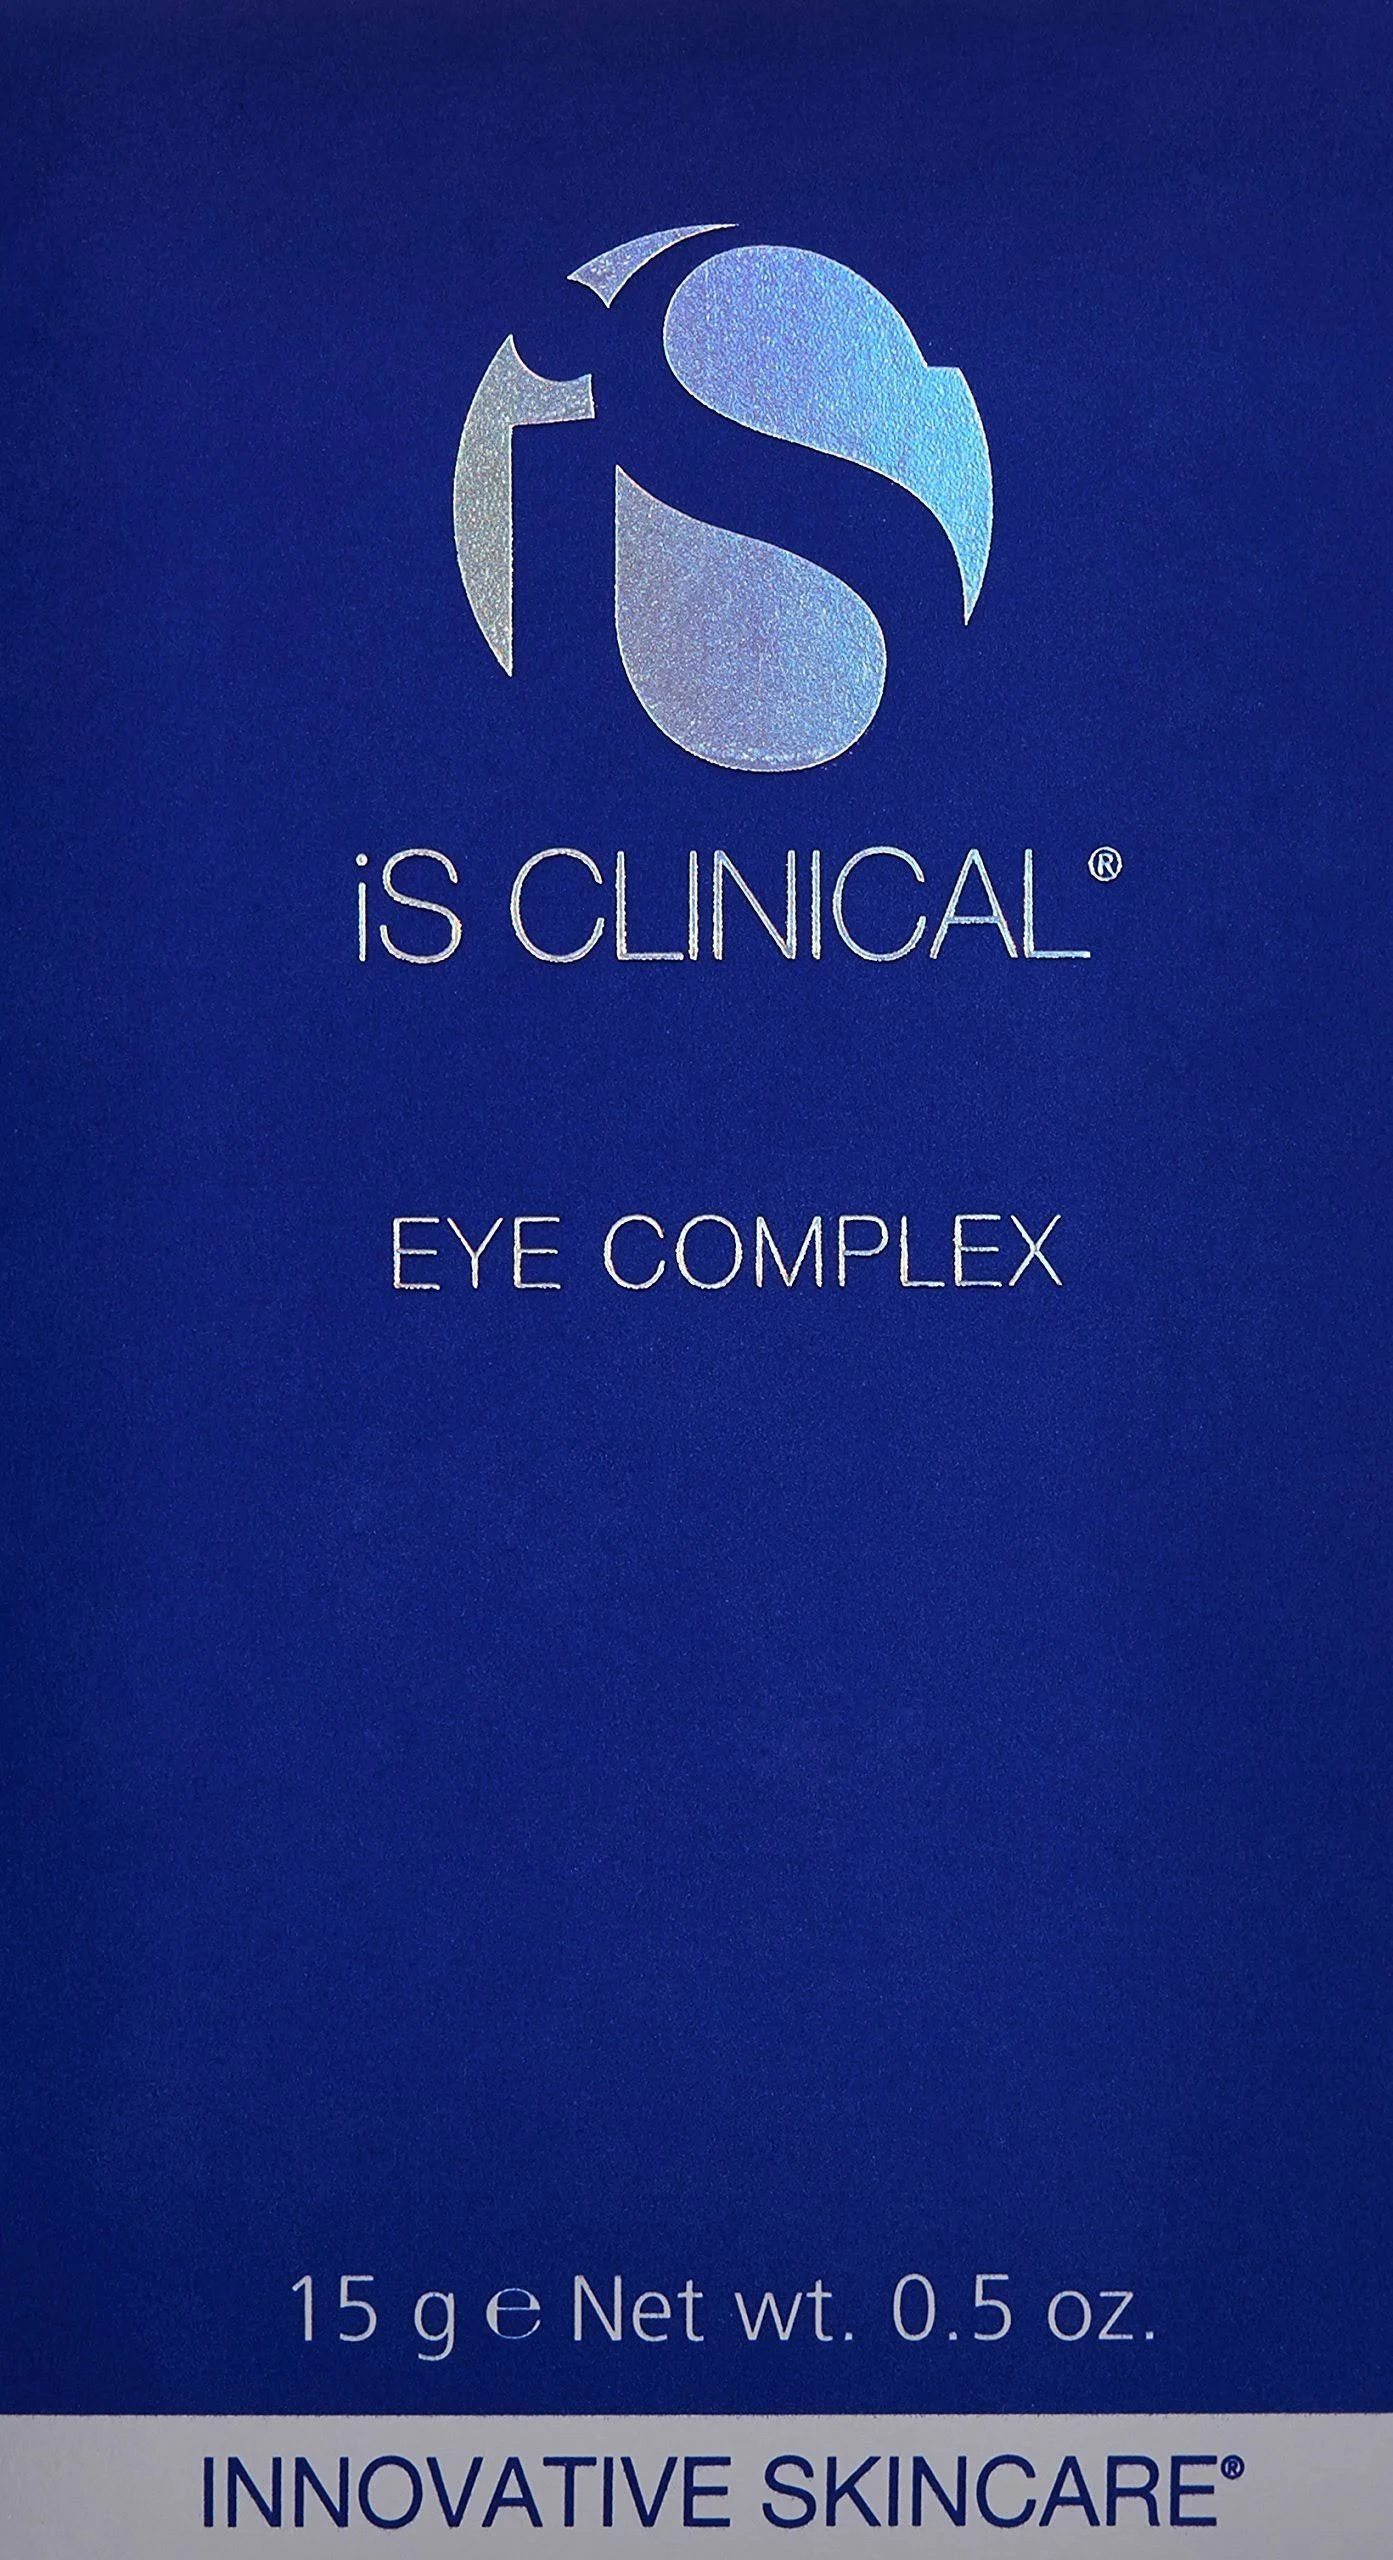 iS CLINICAL Eye Complex